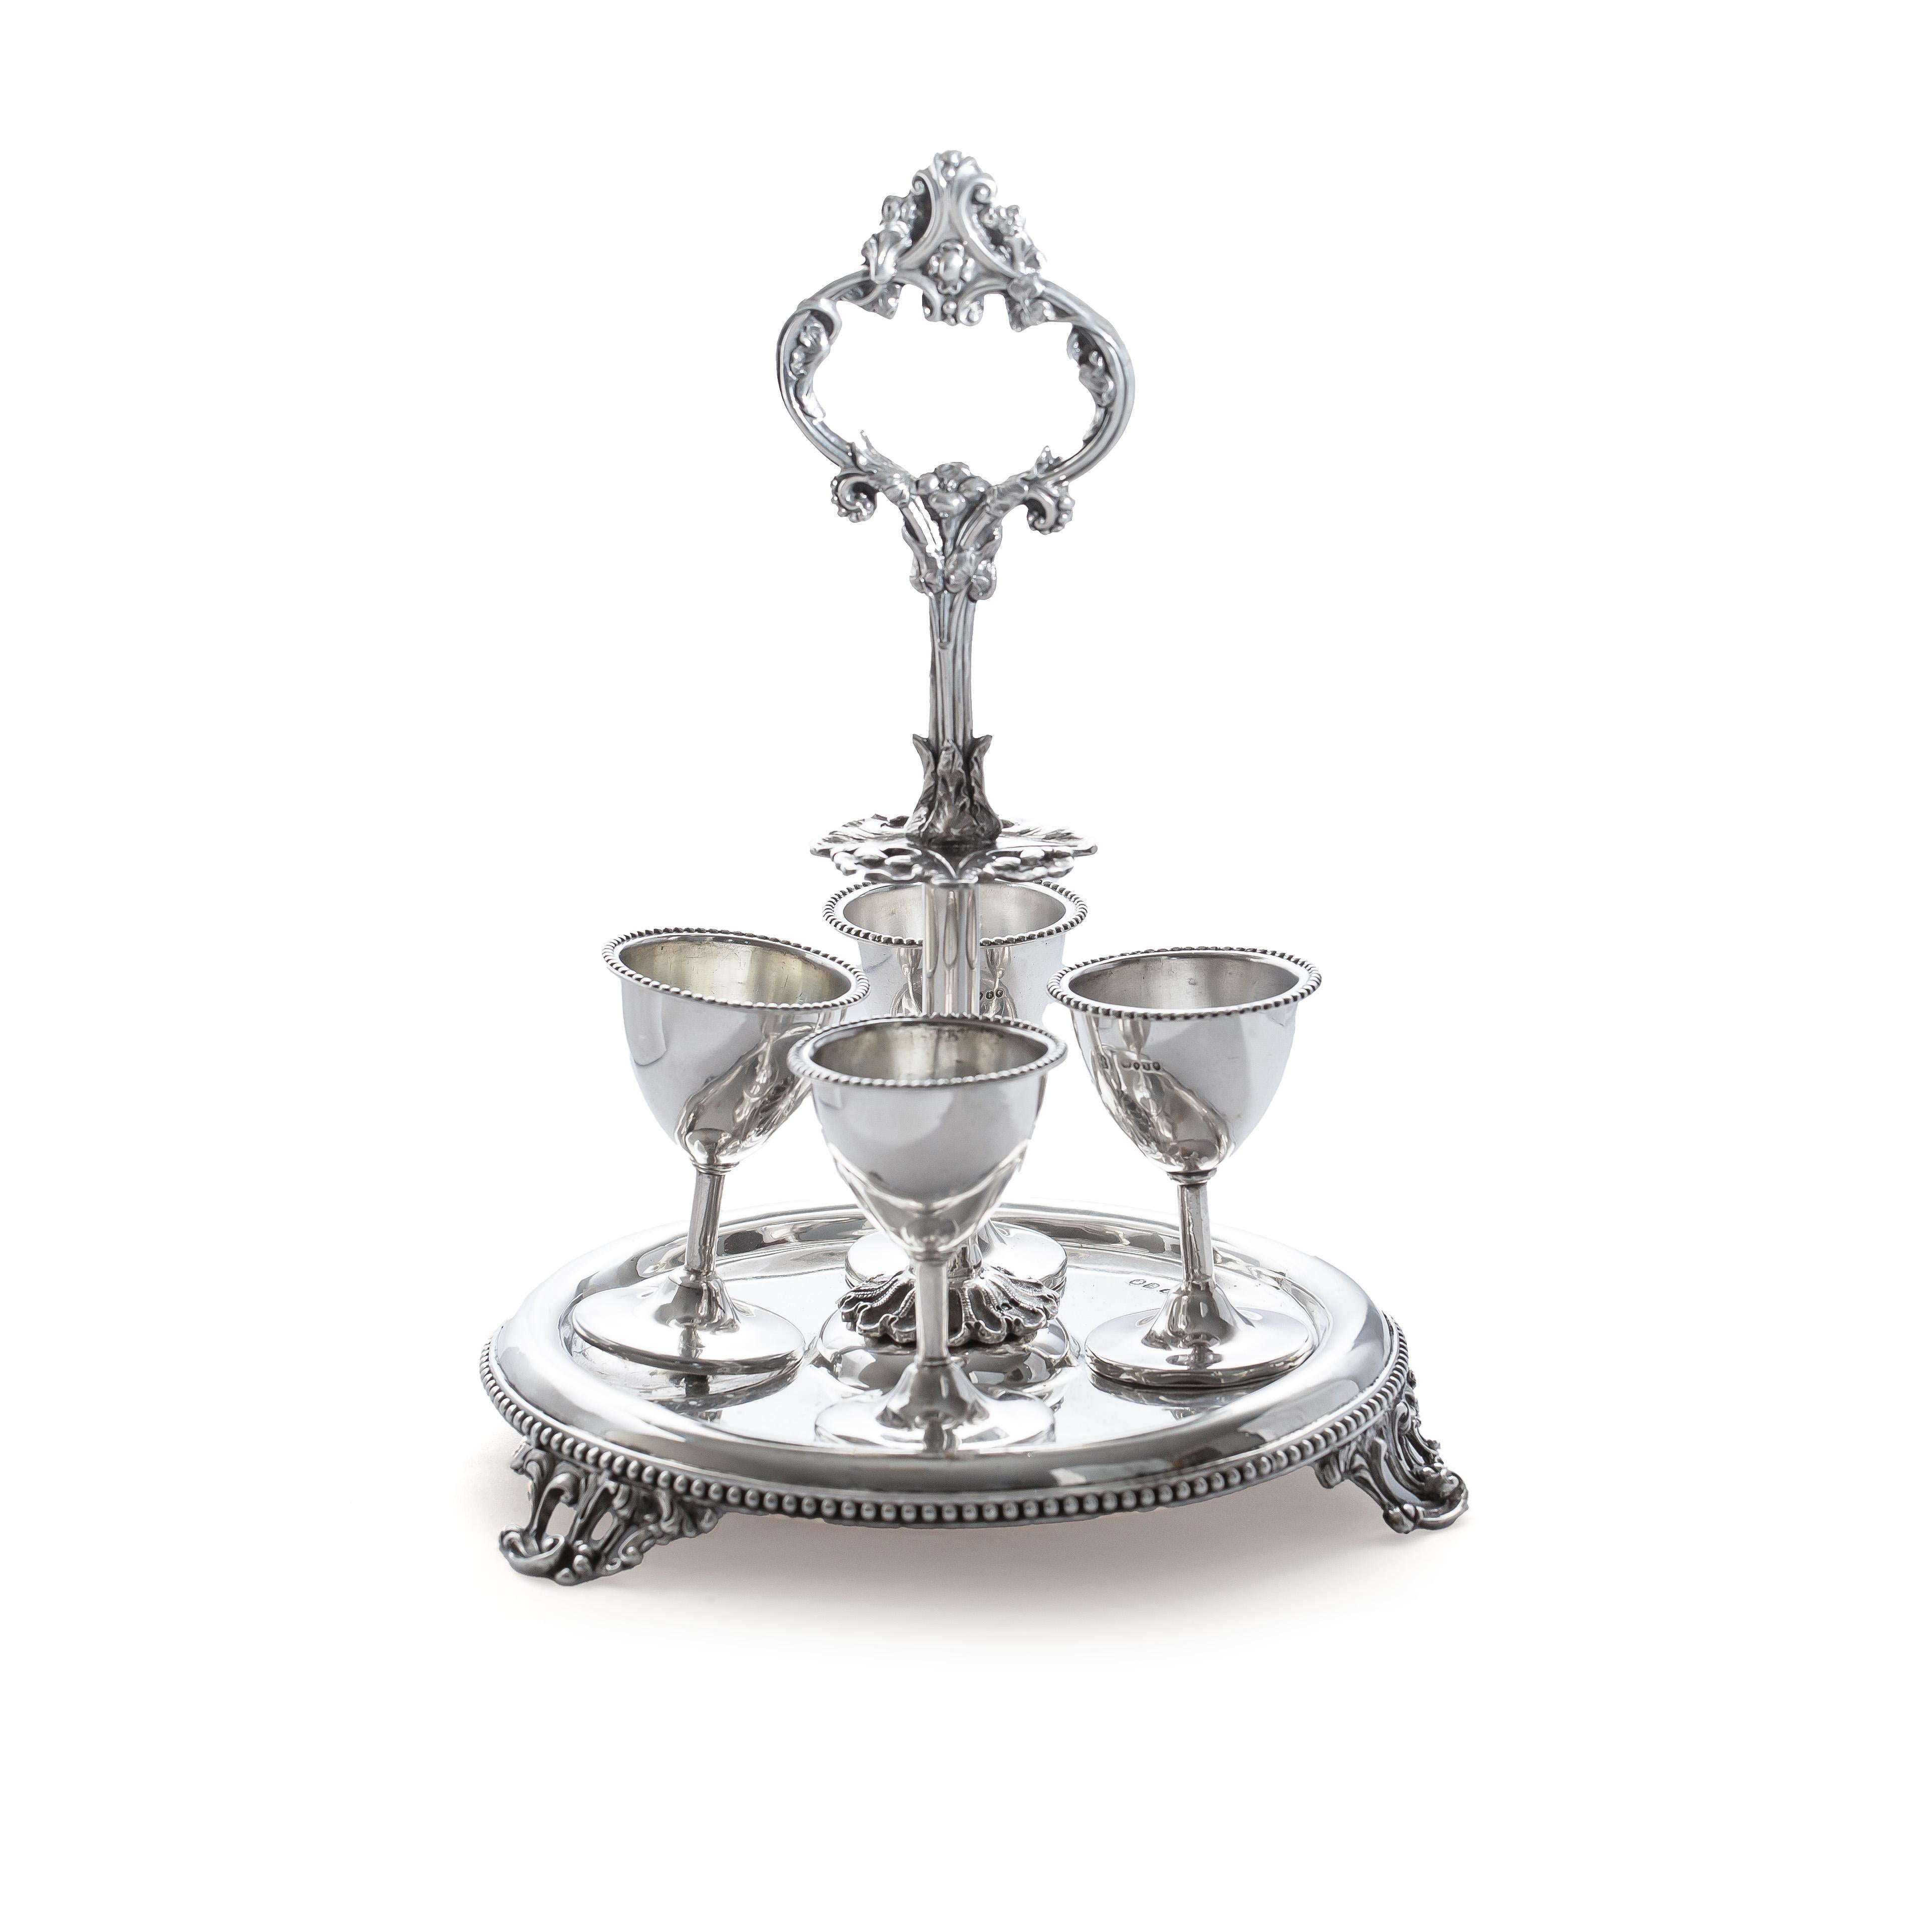 Antique Victorian sterling 925 silver cruet set of 4 with a holder. 
Made in England, 1857
Maker:H J Lias & Son (Henry John Lias & Henry John Lias)
Fully hallmarked.

Dimensions:
Diameter x Height: 17.5 x 25 cm 
Cup size: Diameter x Height: 7.2 cm